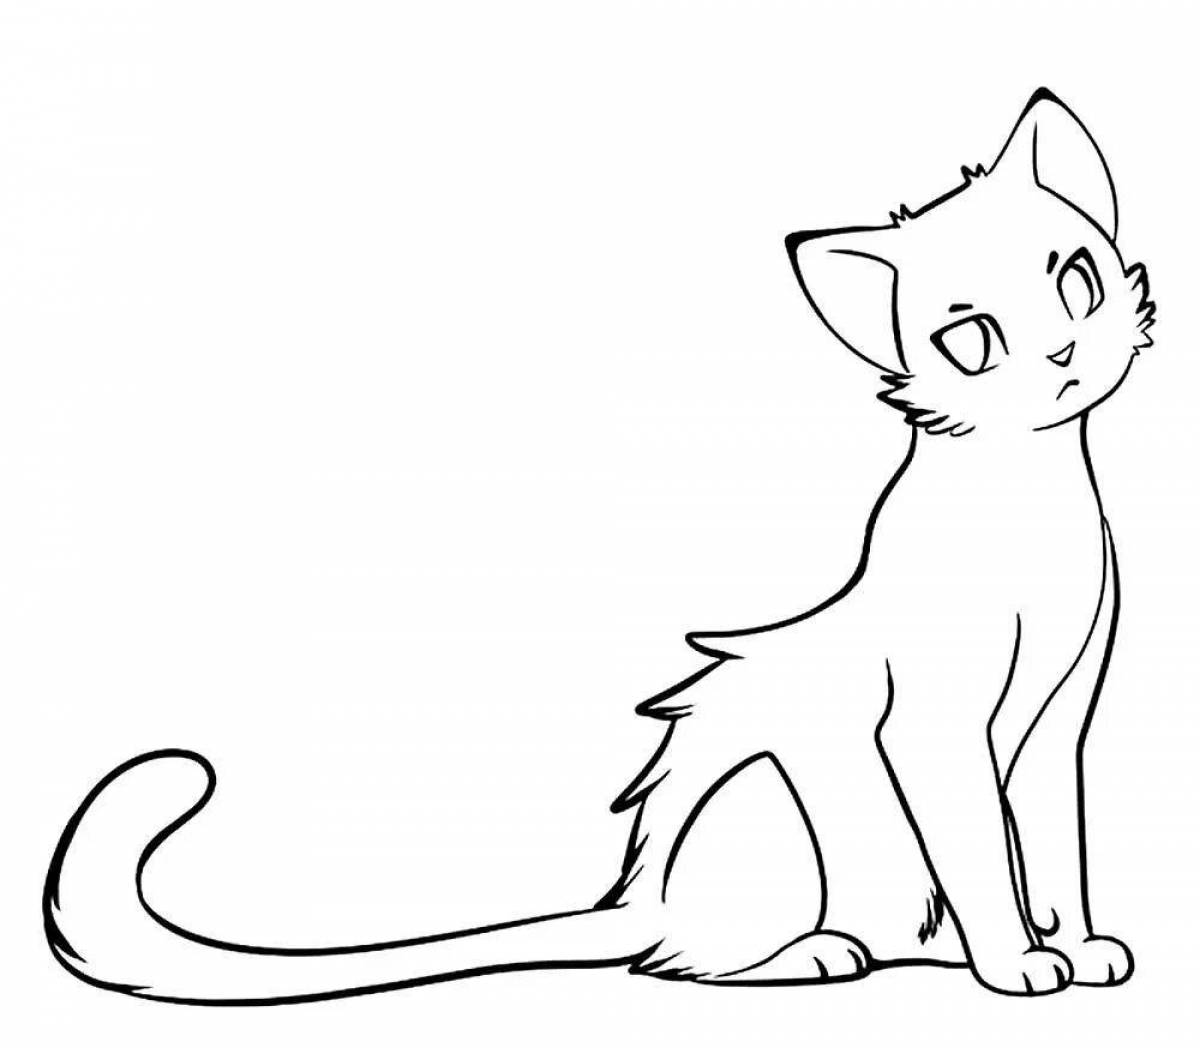 Colorful anime cat coloring page